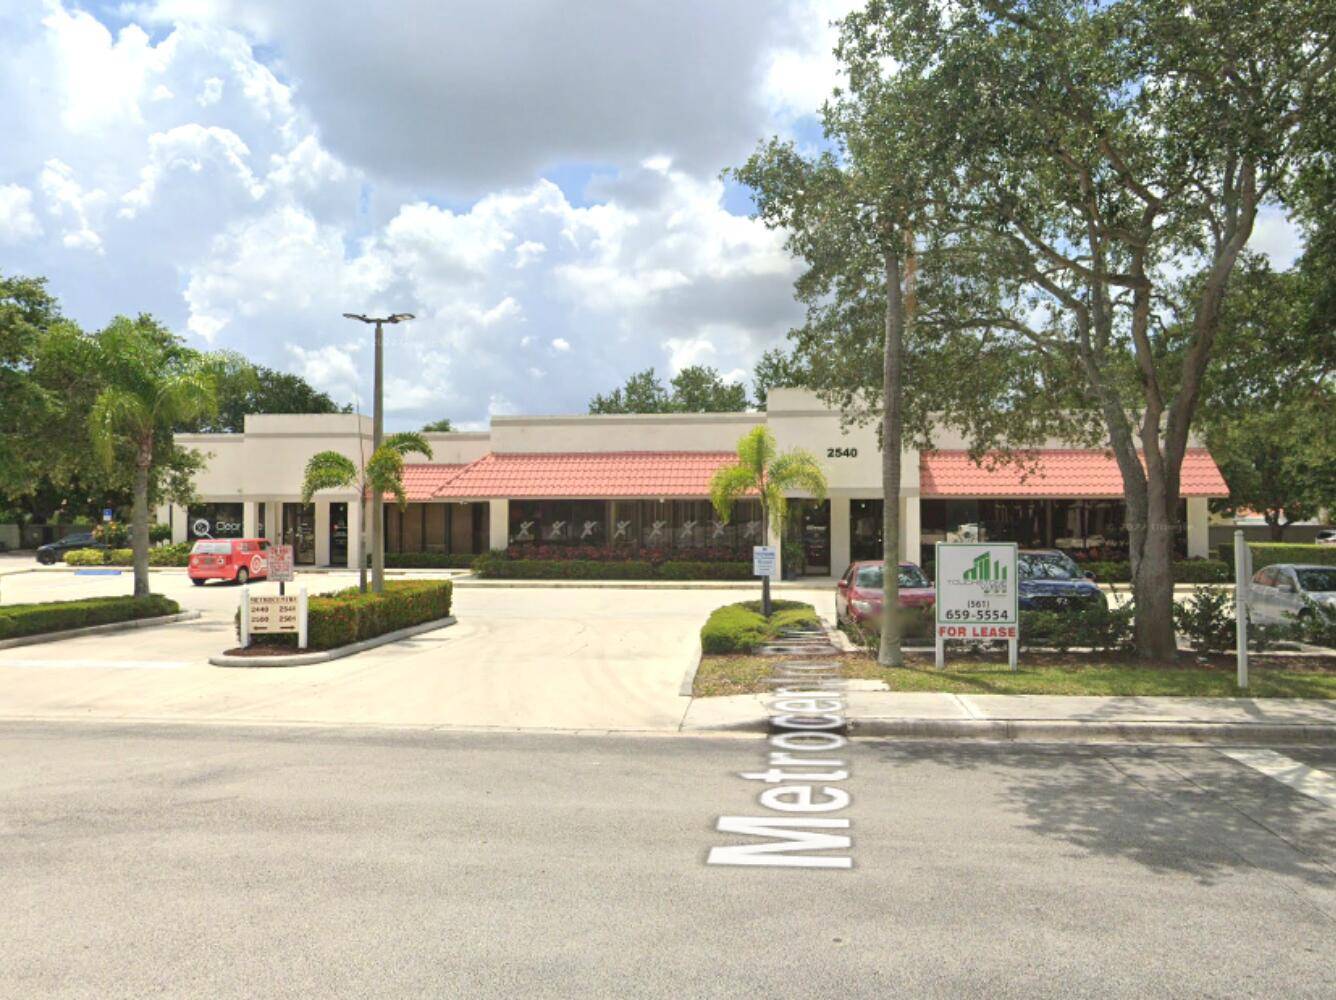 1, 396 Sq. Ft. Ground Floor Professional Office Suite For Lease.